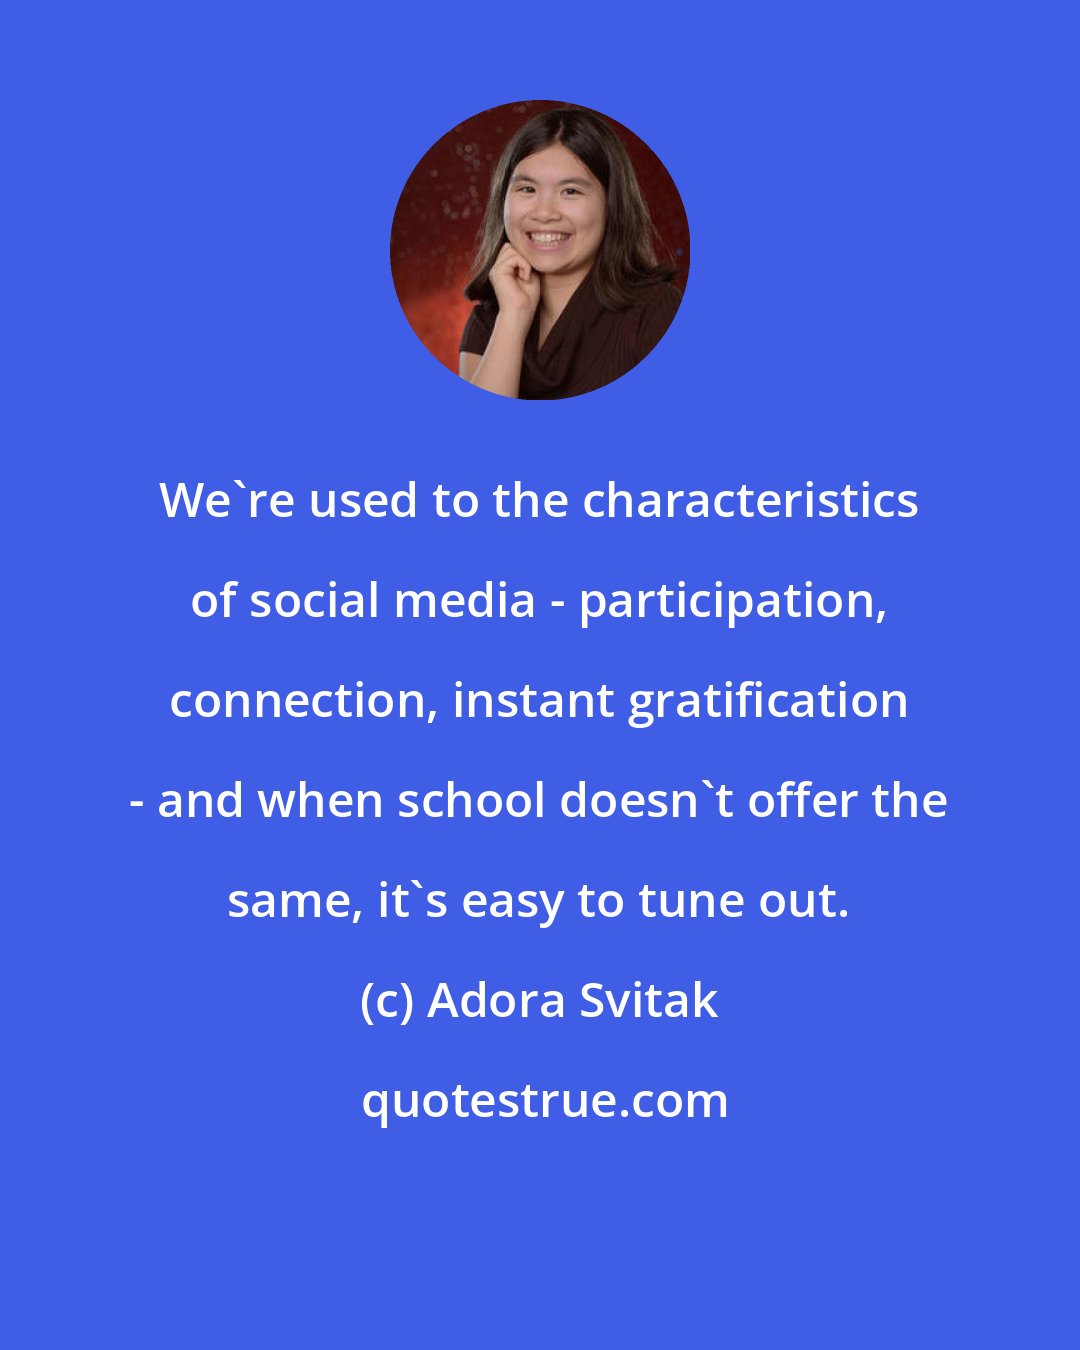 Adora Svitak: We're used to the characteristics of social media - participation, connection, instant gratification - and when school doesn't offer the same, it's easy to tune out.